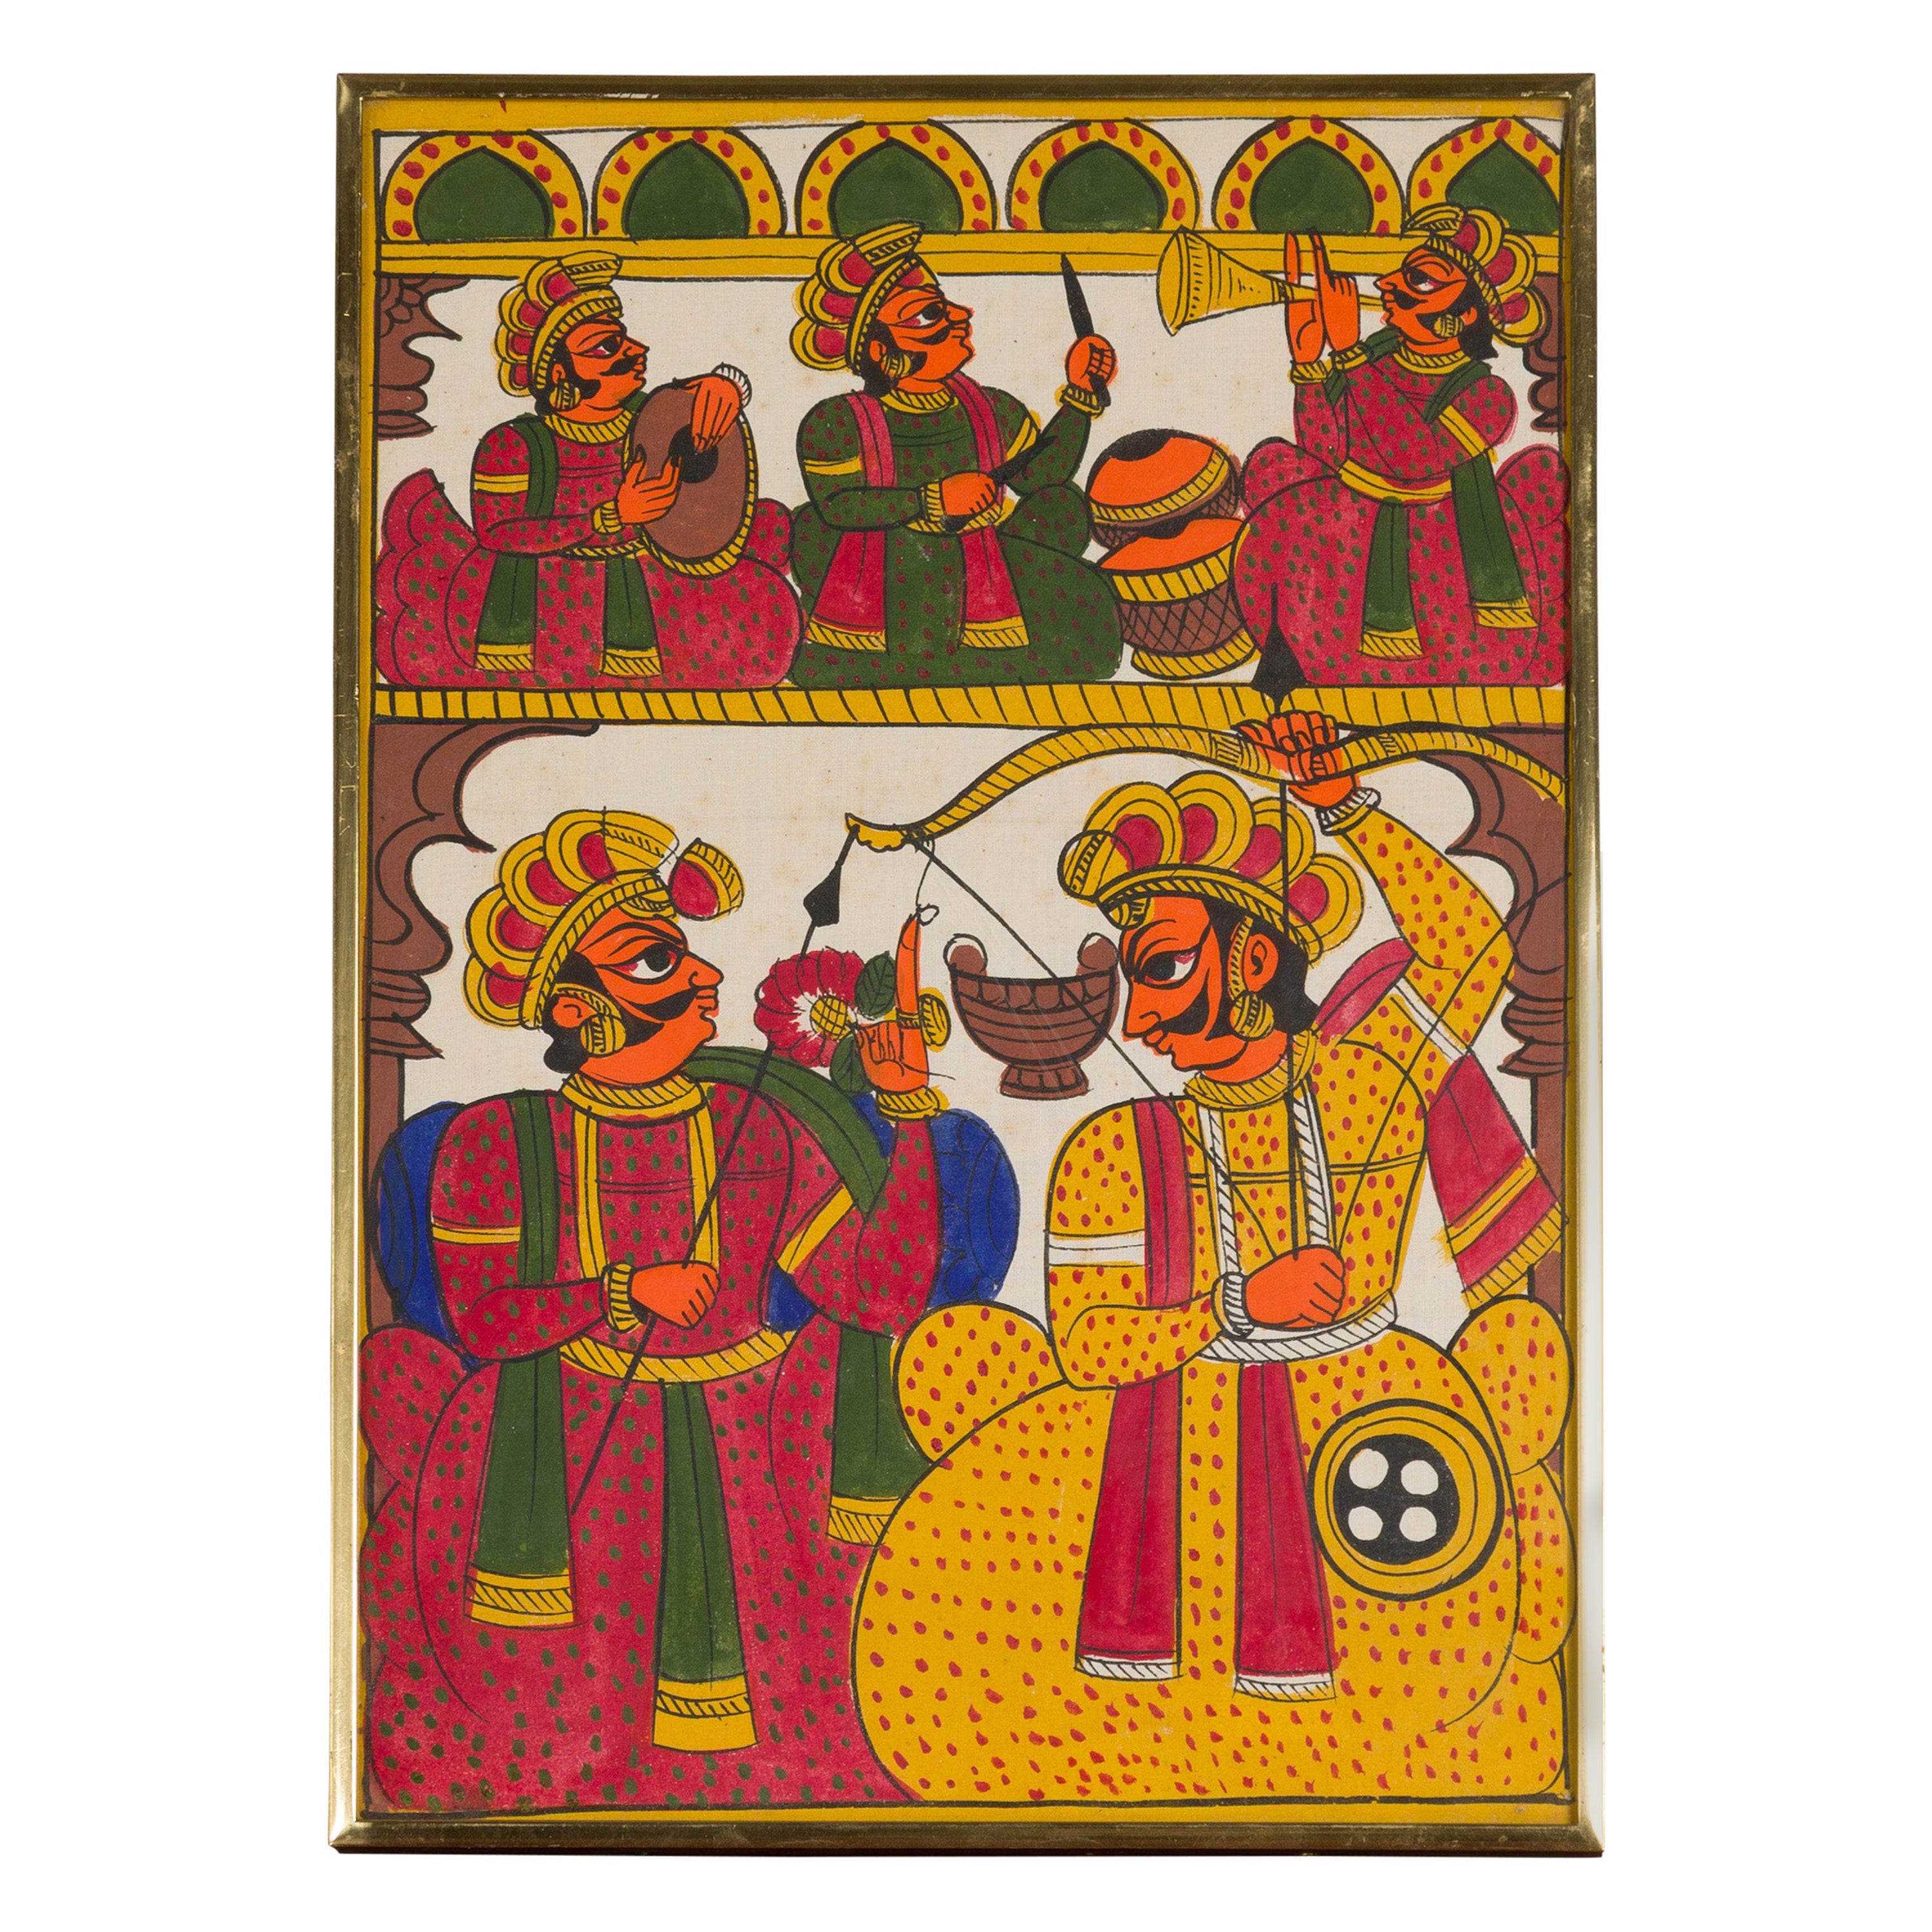 Antique Hand Painted Indian Folk Art Painting Depicting Musicians and Archers For Sale